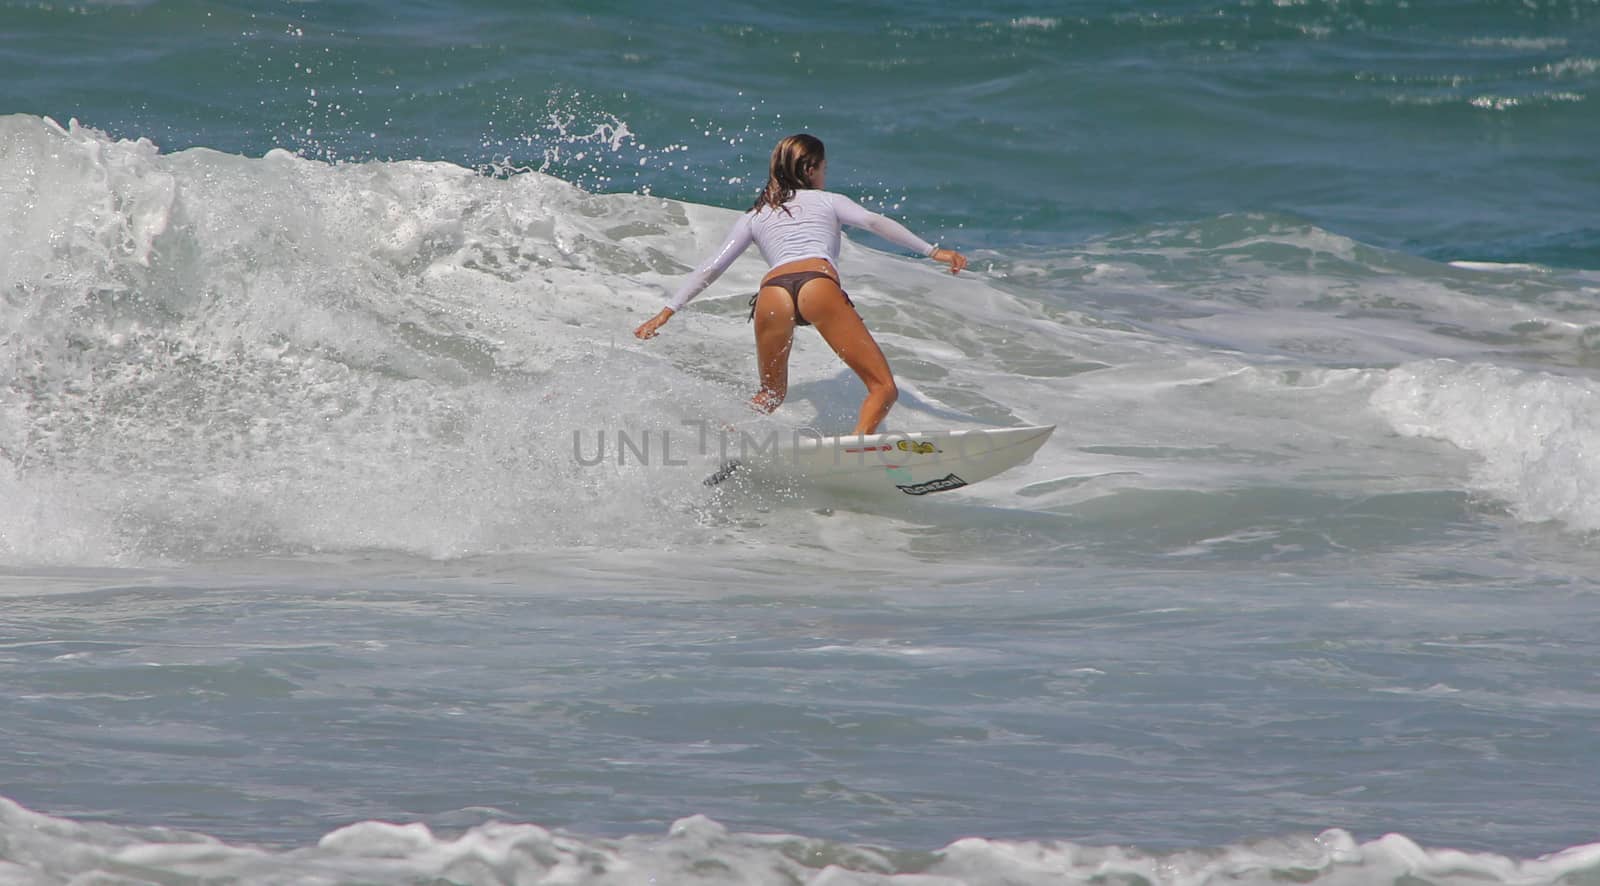 A young lady surfing in Puerto Escondido, Mexico
01 Apr 2013
No model release Editorial only